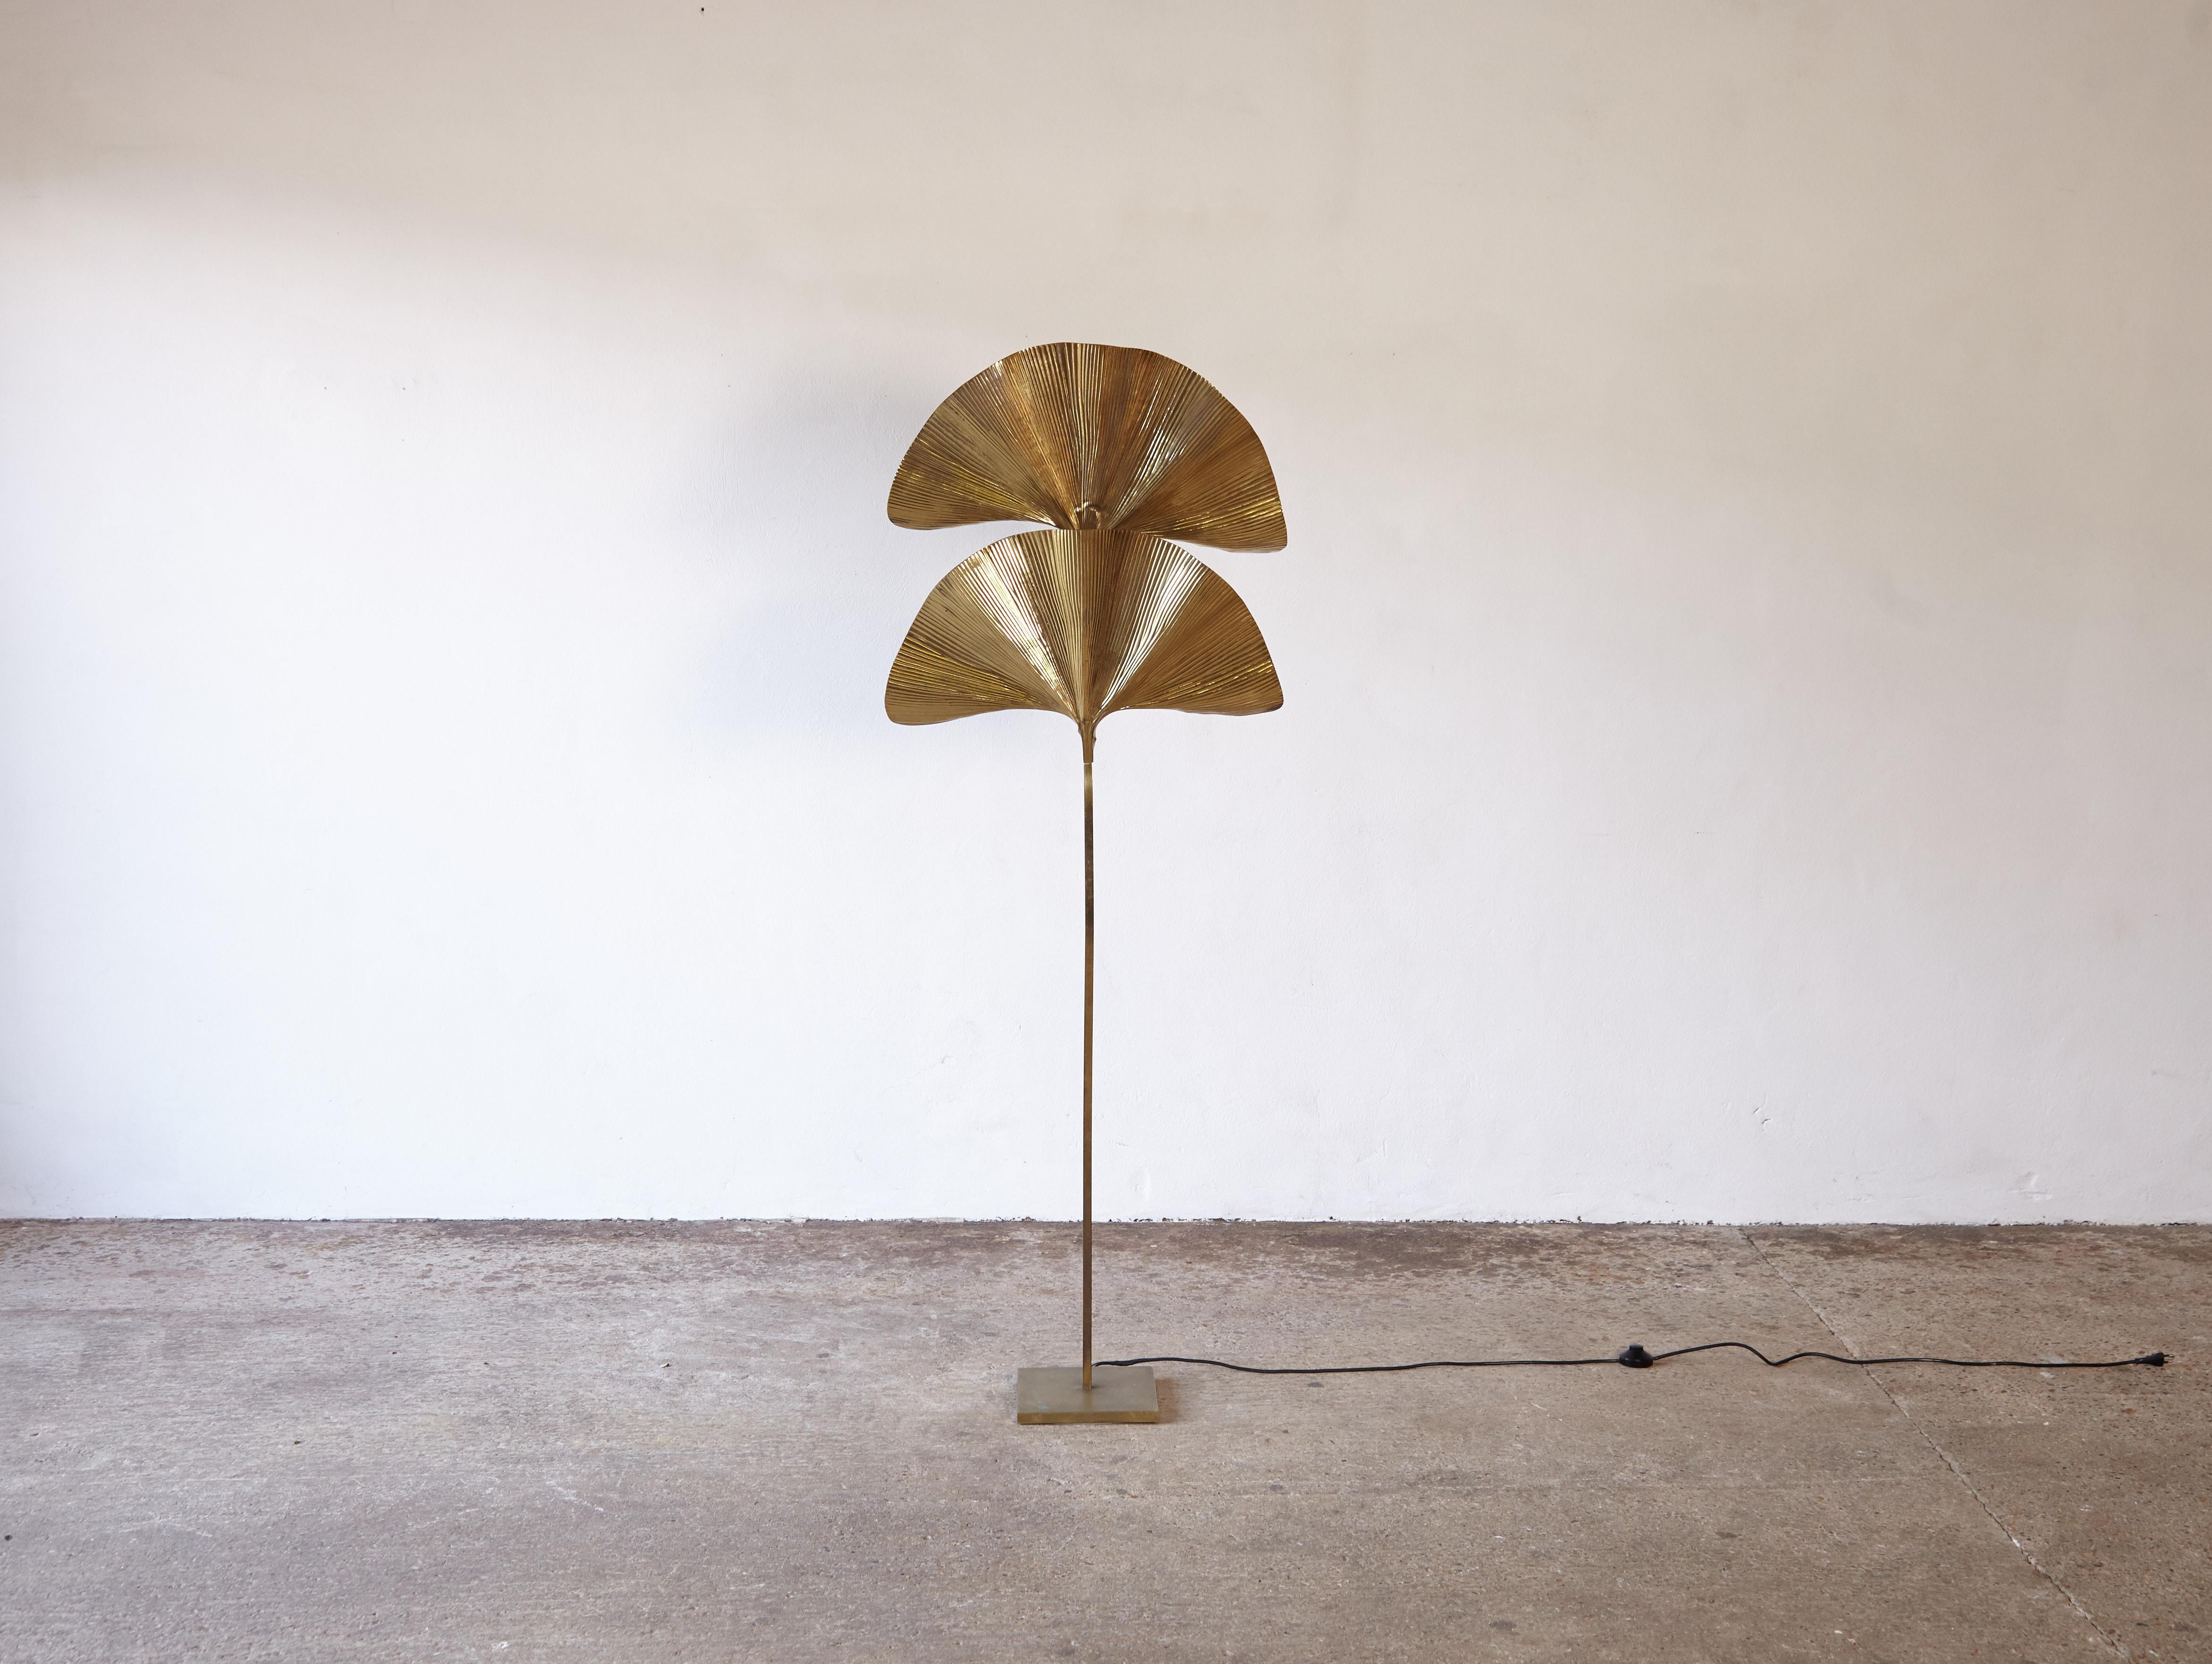 An original large Tommaso Barbi brass Ginkgo floor lamp, made in Italy, 1970s. Patinated brass. Good original condition with a couple of minor dents near the stem. Measures: Height 181cm. Requires local rewiring prior to use. Ships worldwide.